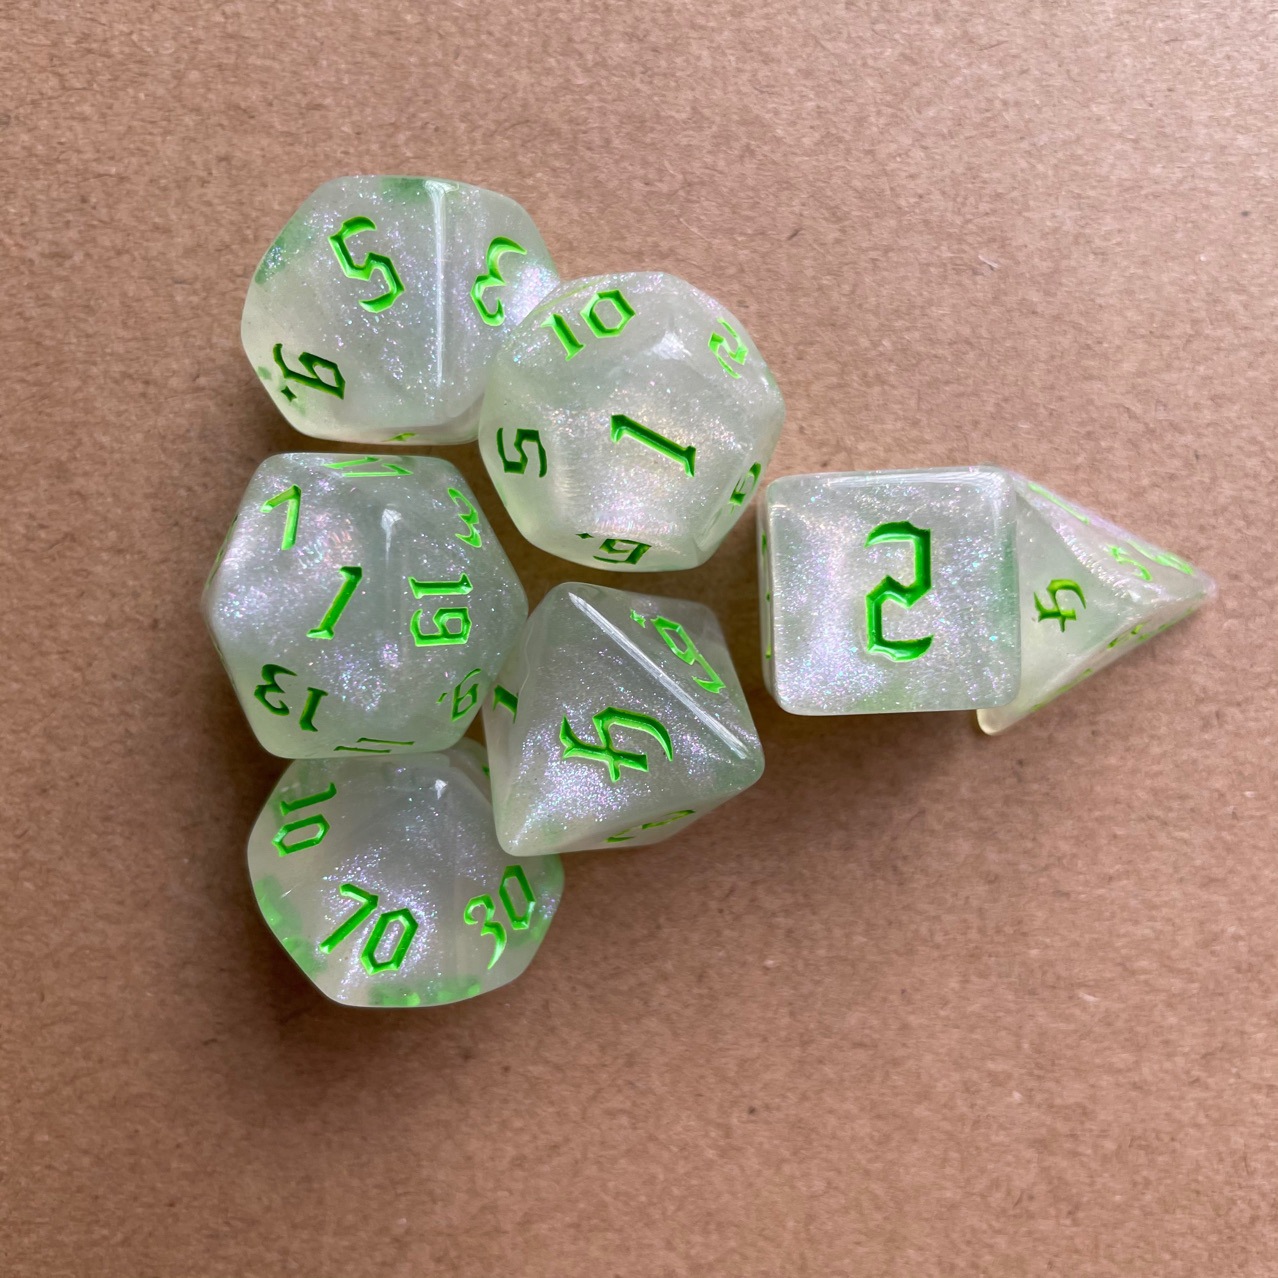 Amazon 7 Pieces Of New Font White Chameleon Dice Polyhedron Dice Foreign Trade Board Game Running Group